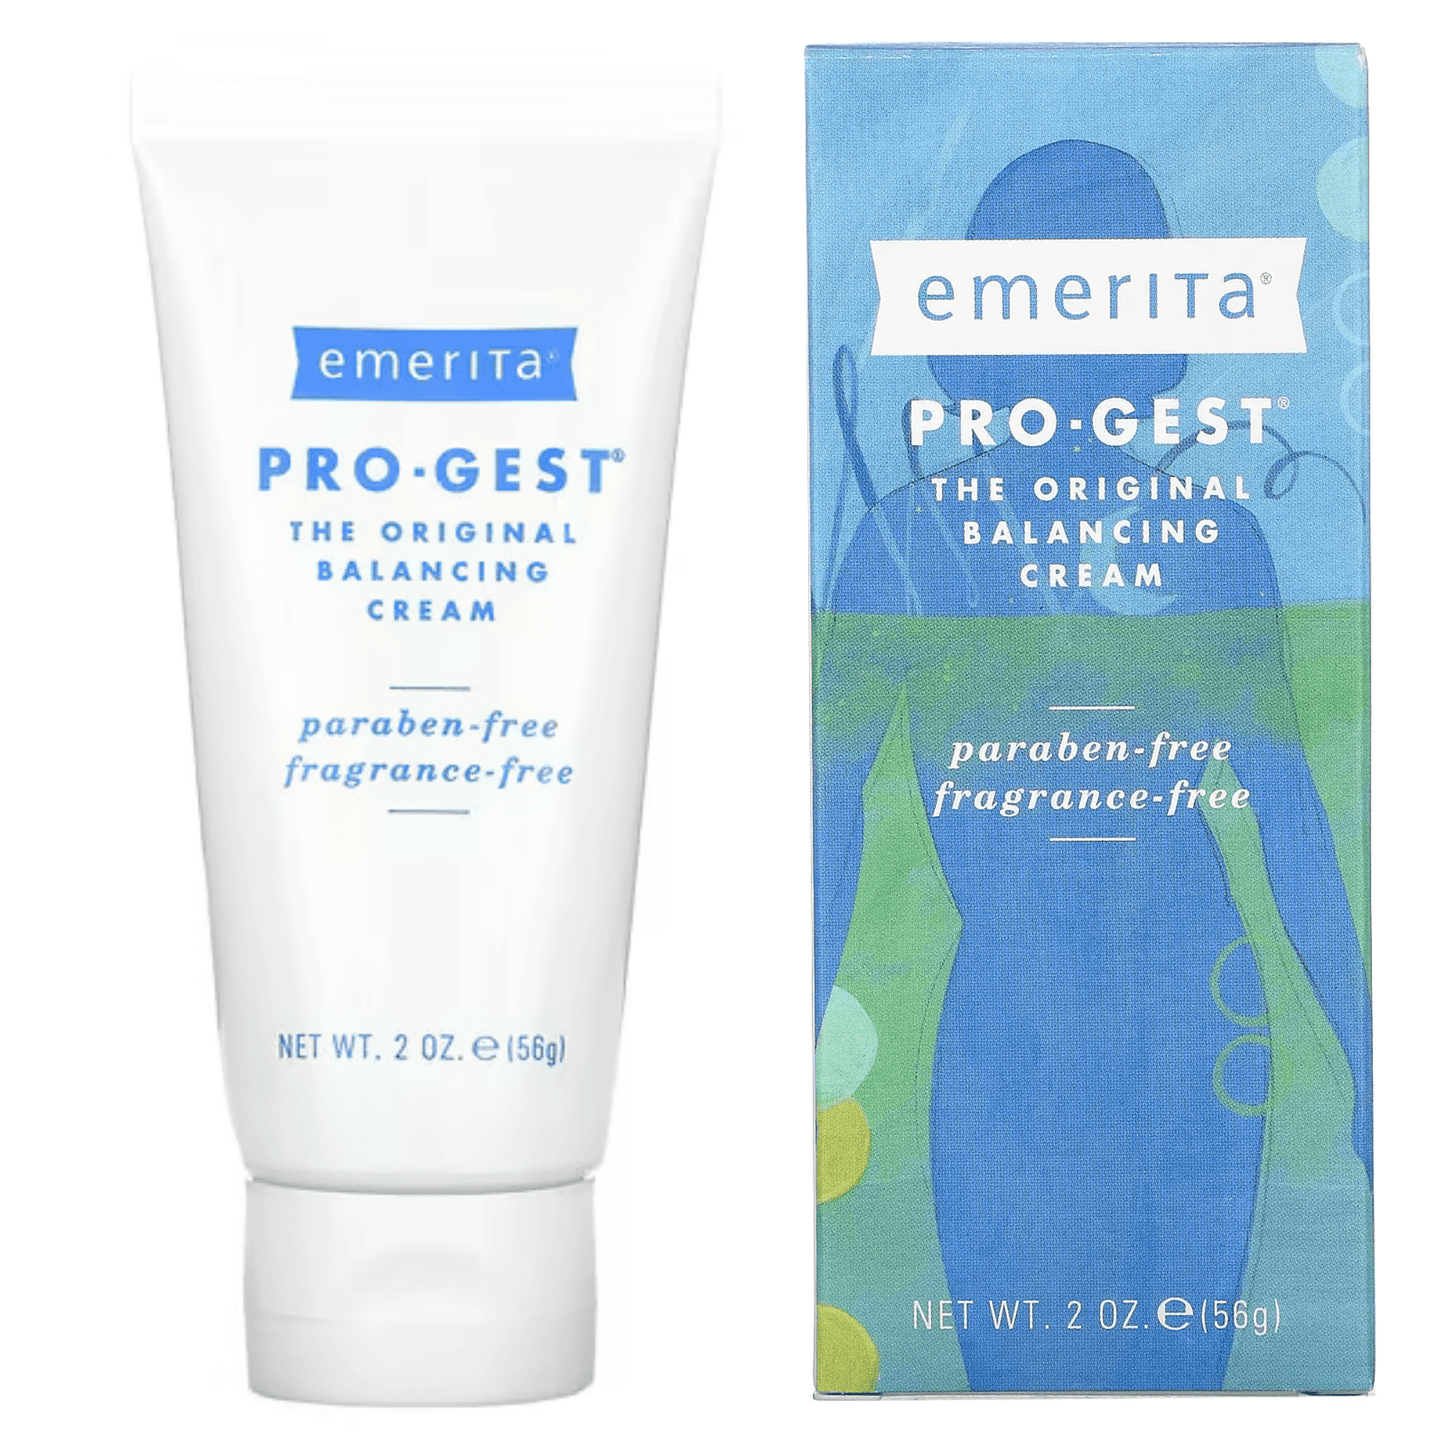 Primary Image of Products Emerita Pro-Gest Paraben Free Natural Progesterone Cream